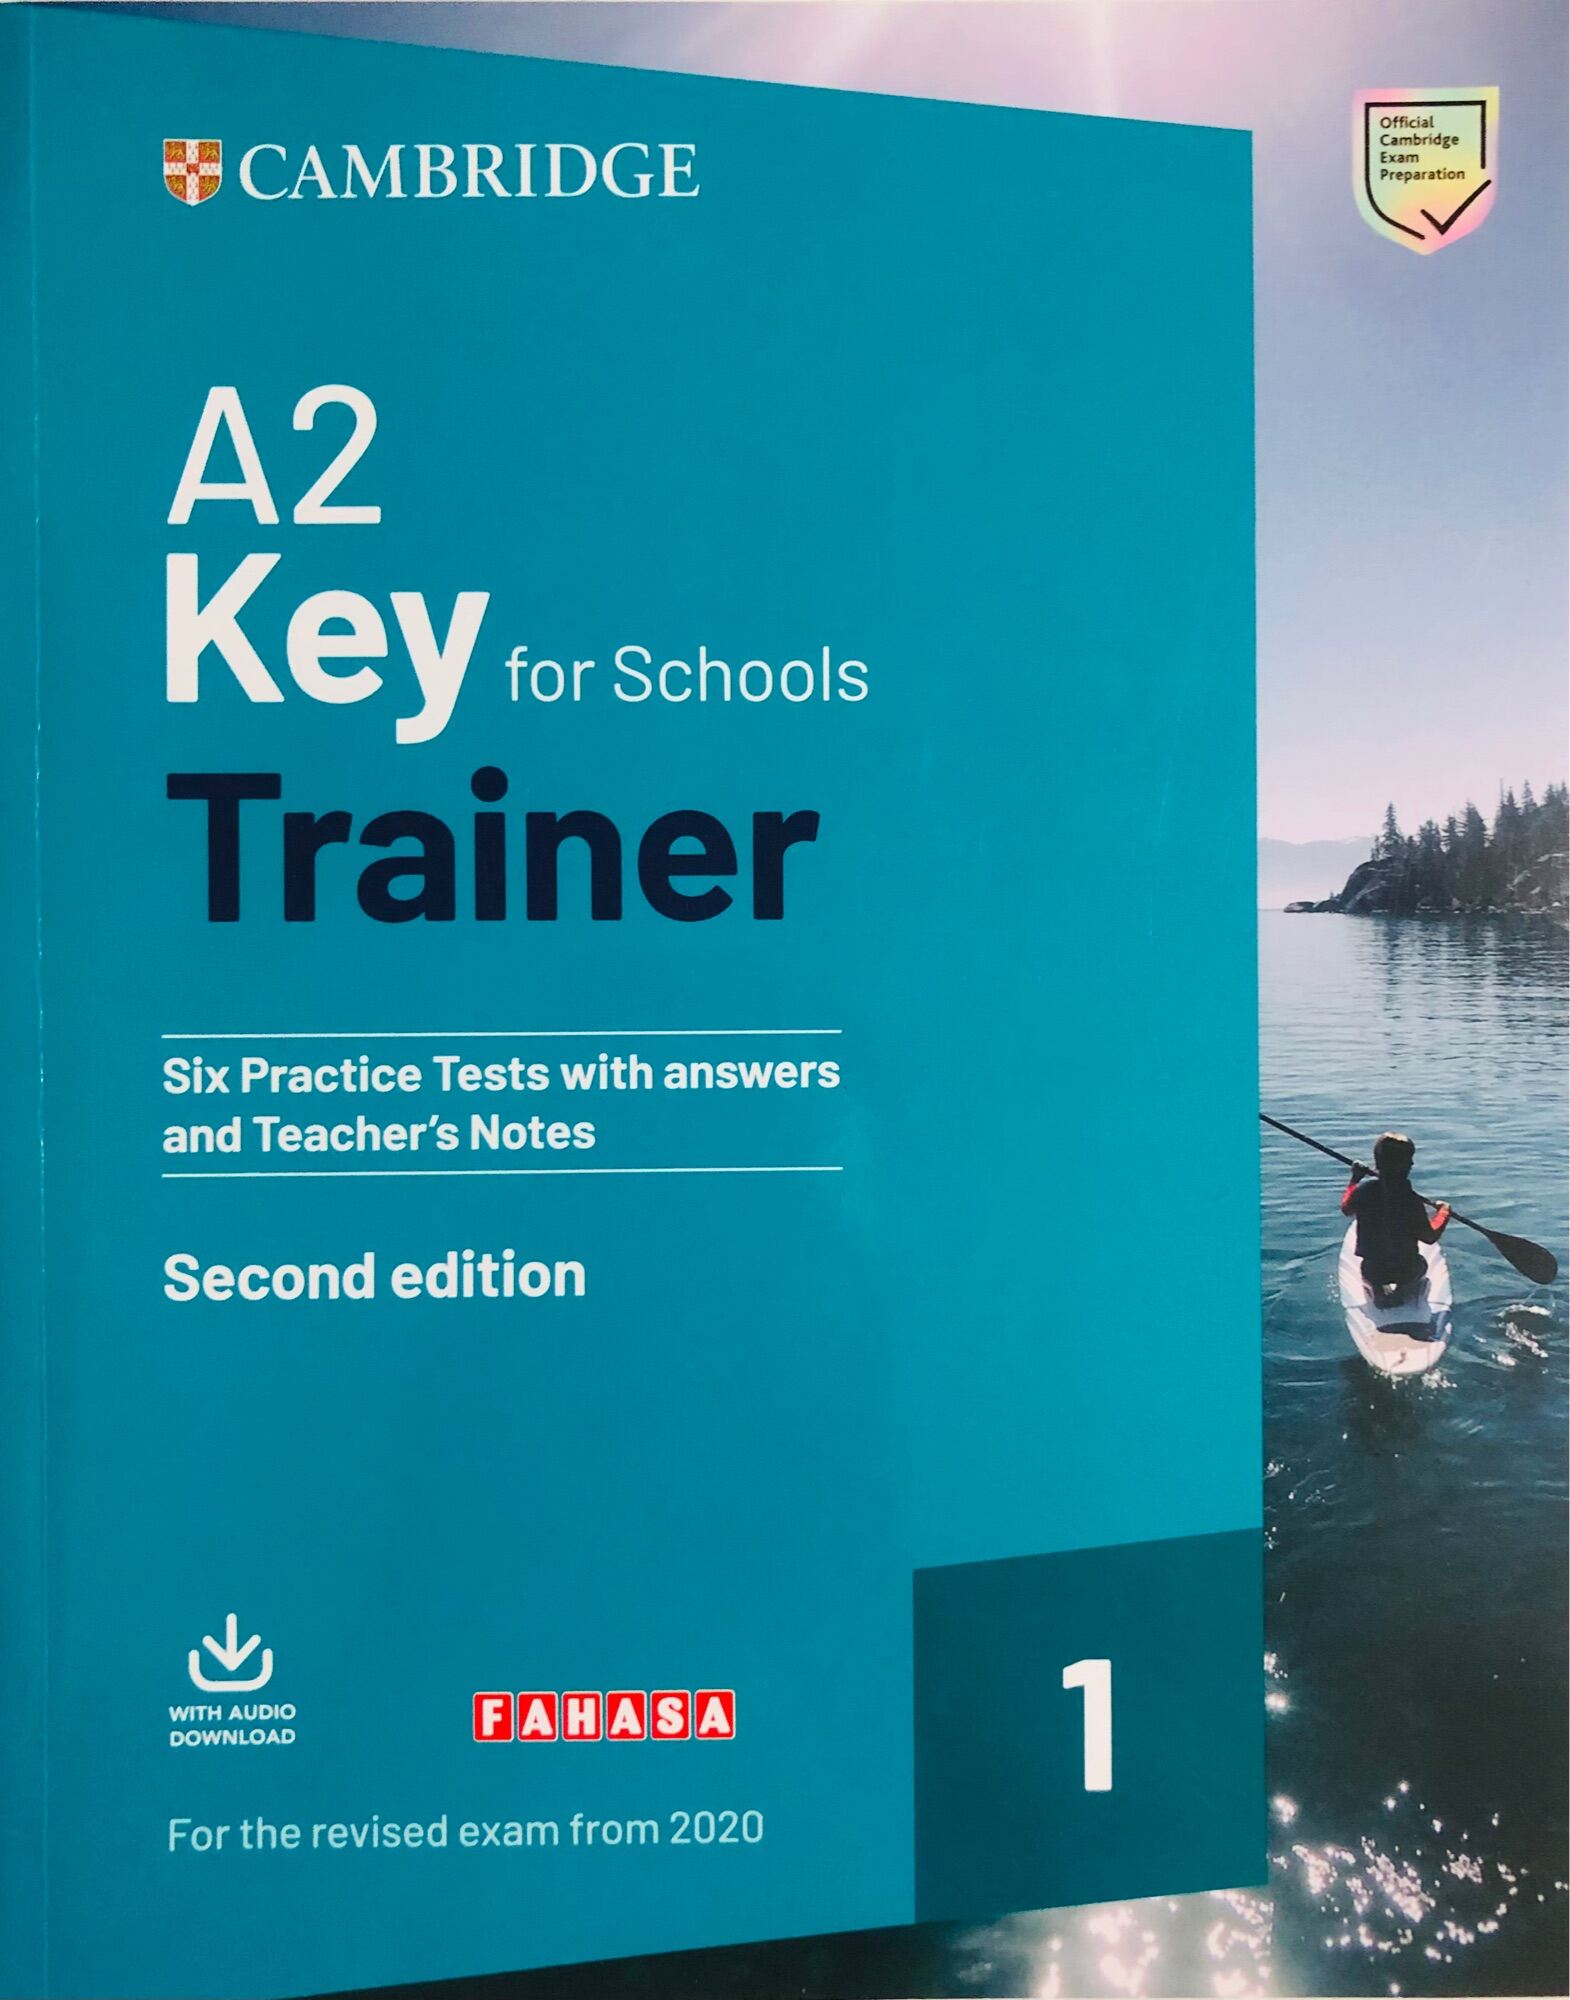 Cambridge - A2 KEY for School Trainer 2nd